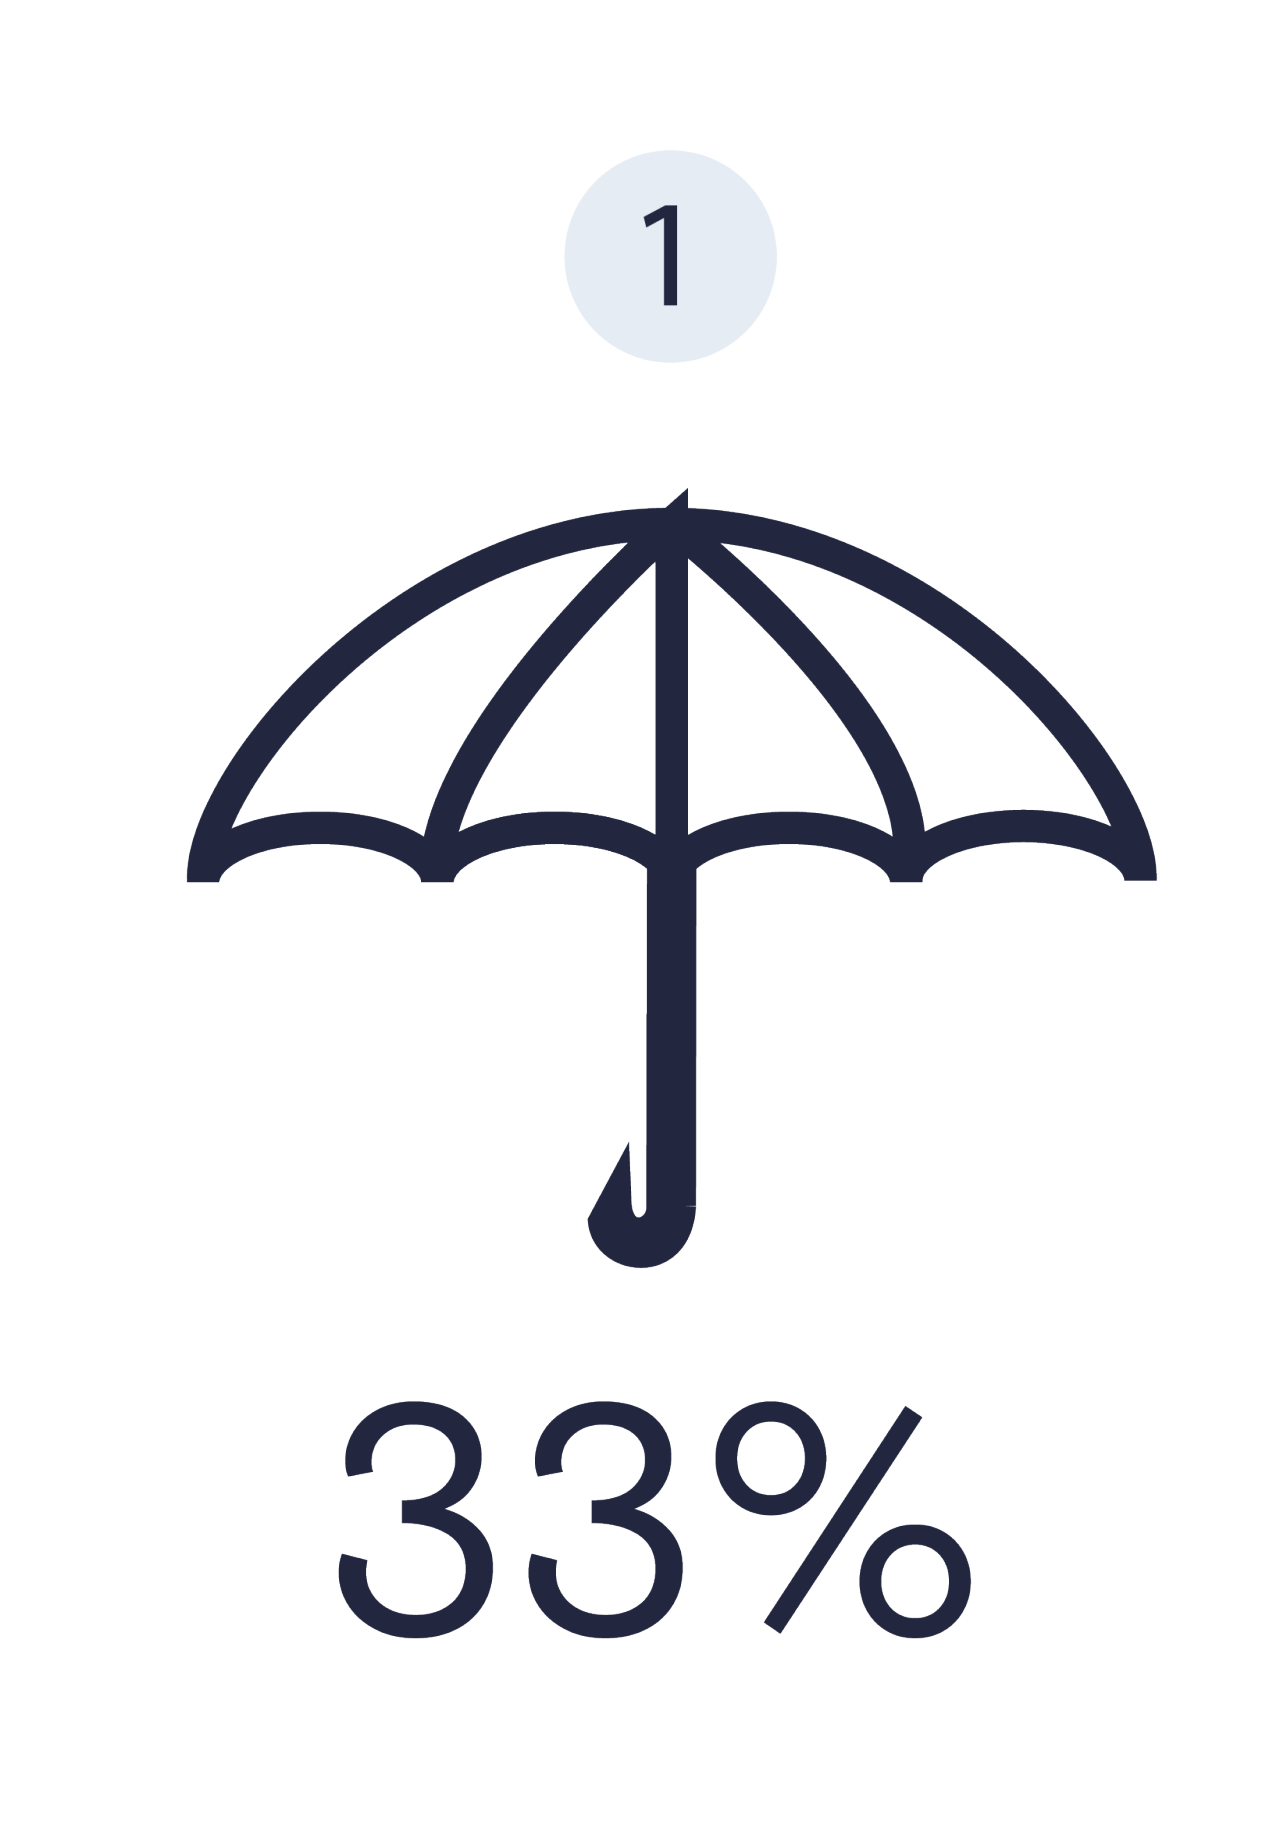 Image shows a dark blue number 1 in a light blue circle at the top. Underneath is a dark blue outline icon of an umbrella.  Underneath the umbrella is dark blue text which reads '33%' representing the number of people who save for a rainy day.